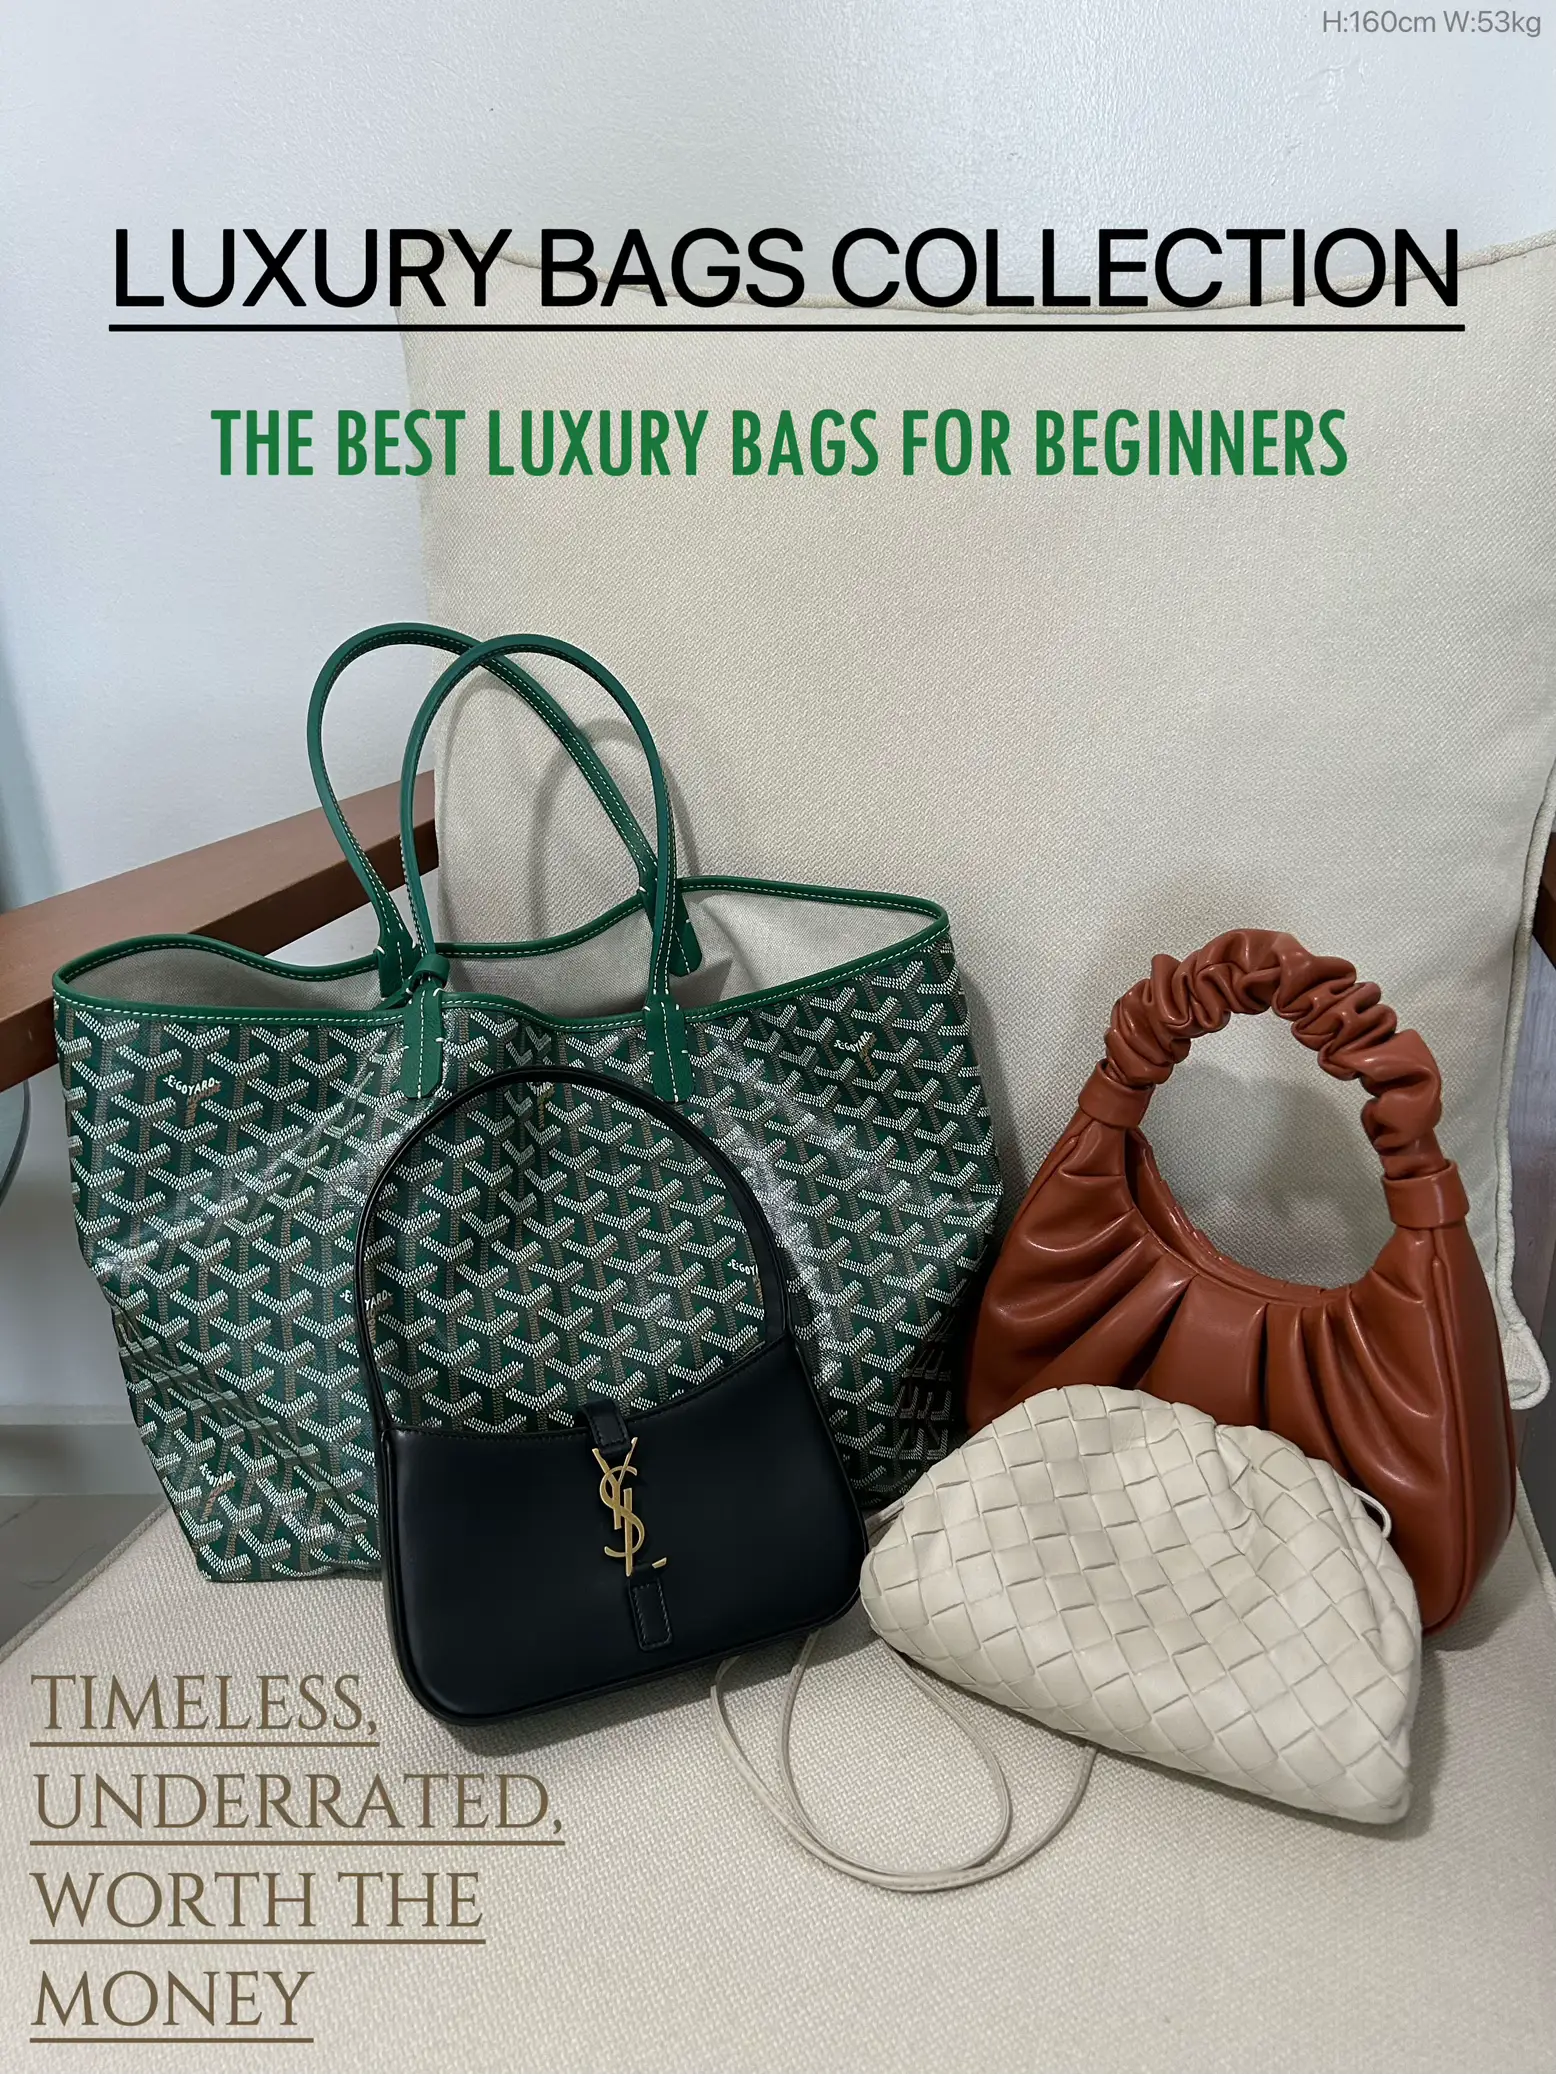 3 LUXURY BAG YOU MUST HAVE!, Gallery posted by Faznadia